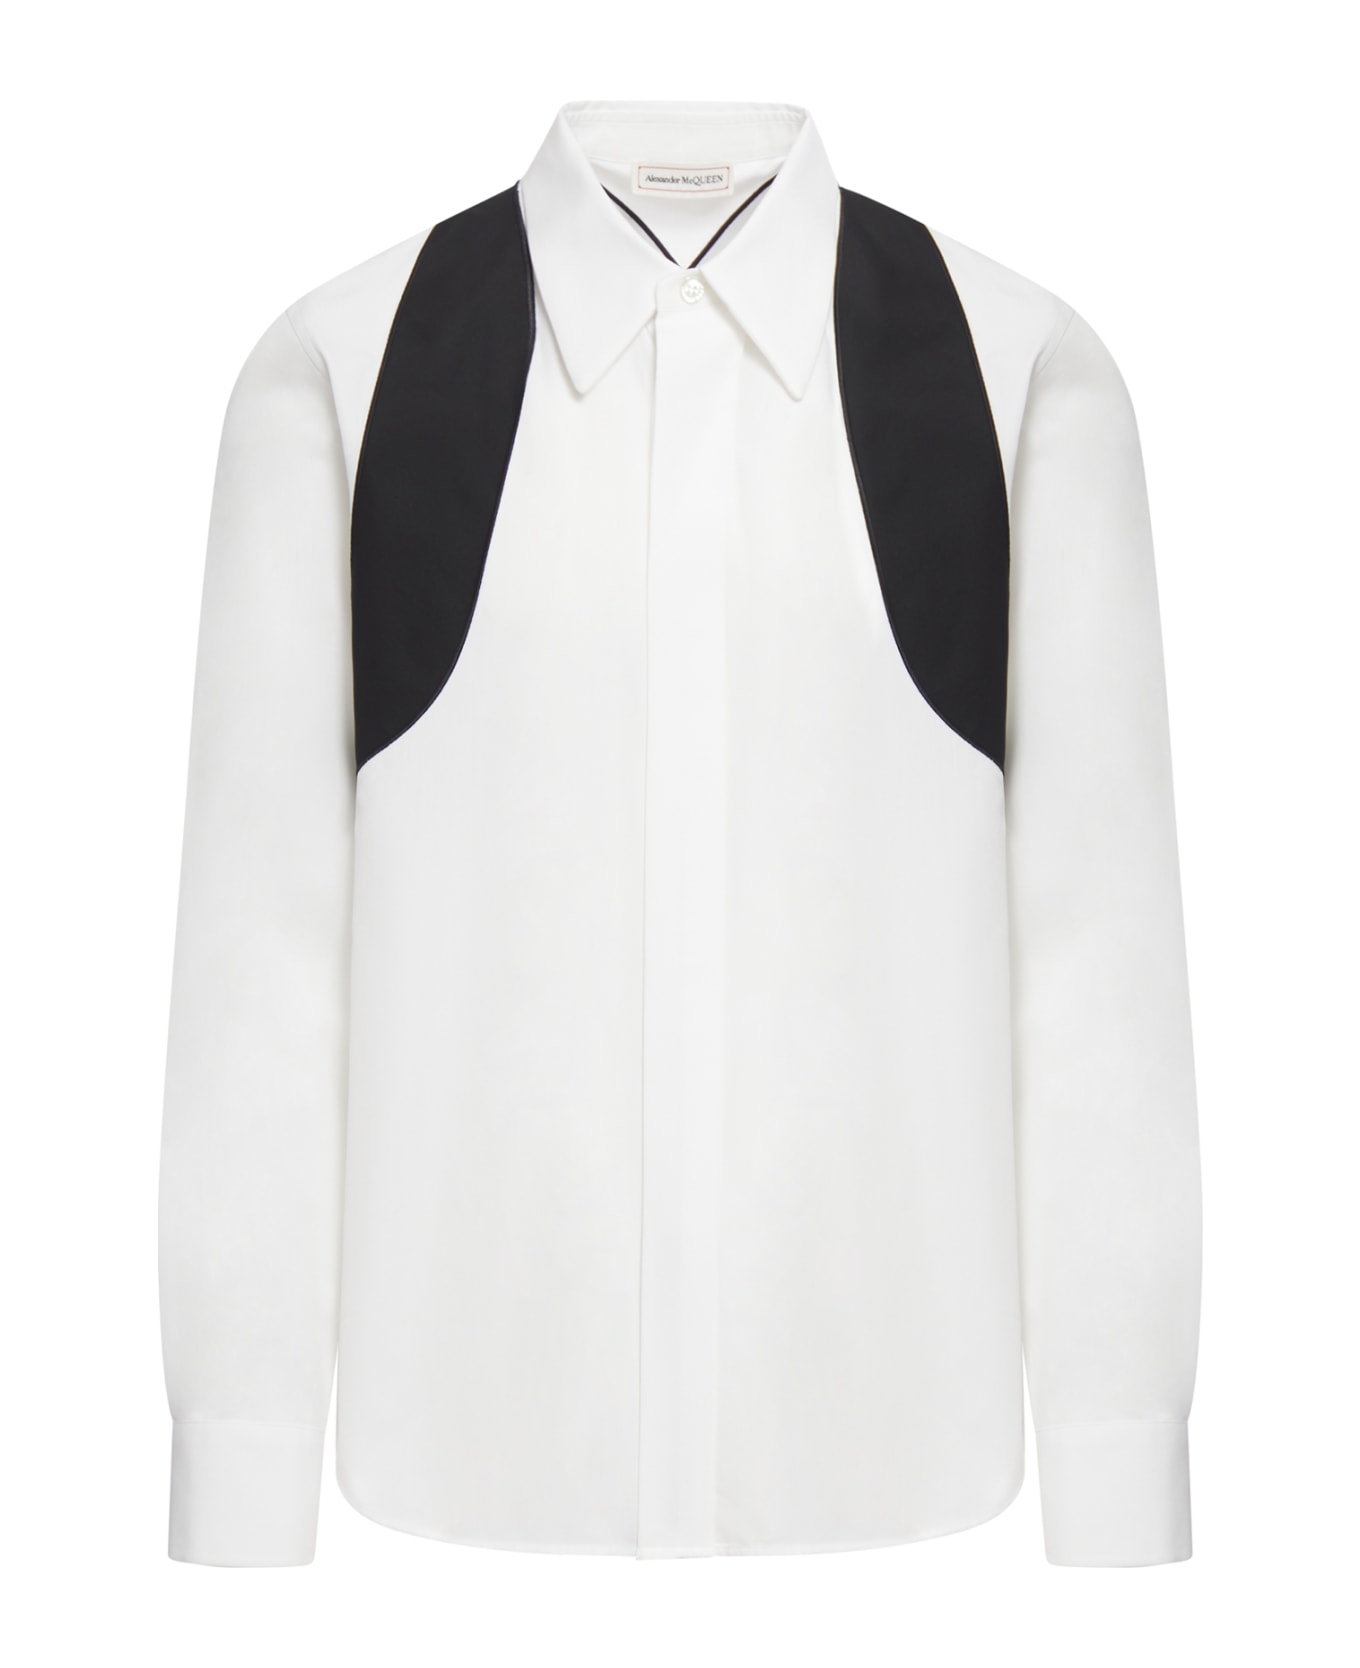 Alexander McQueen Graphic Printed Long Sleeved Shirt - Optical White